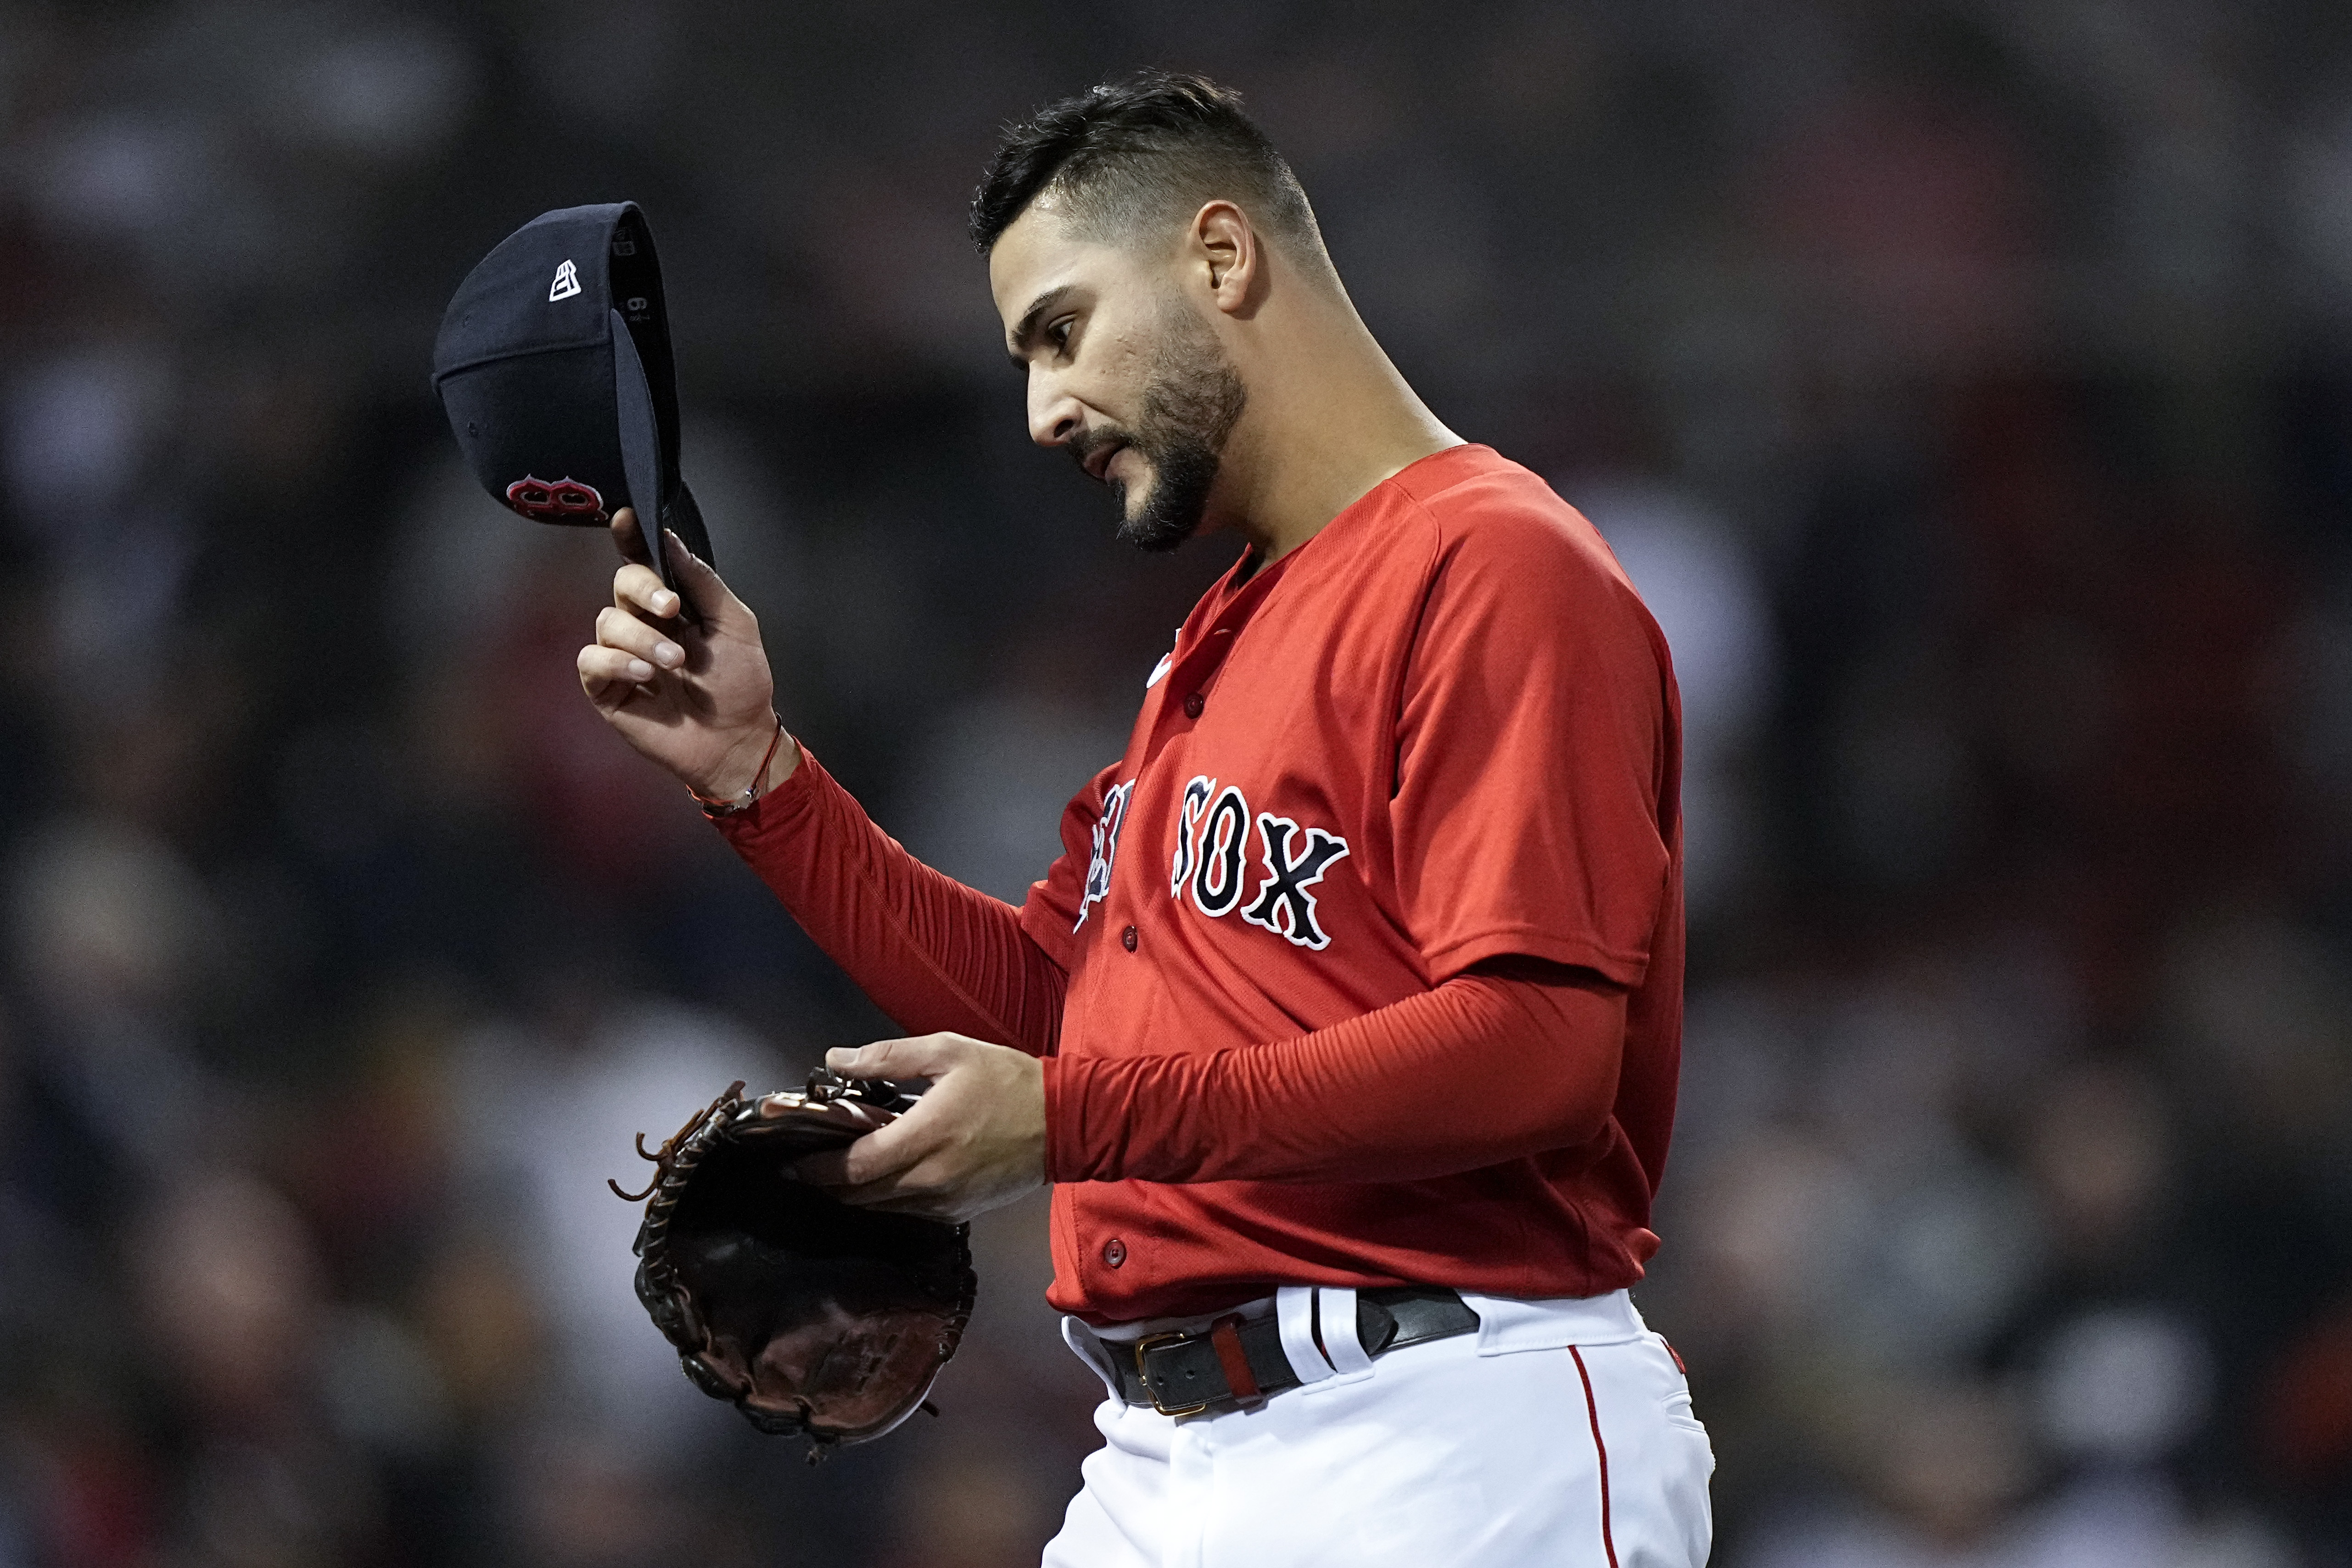 Martín Pérez, ex Boston Red Sox starter, signs with Rangers (reports) 